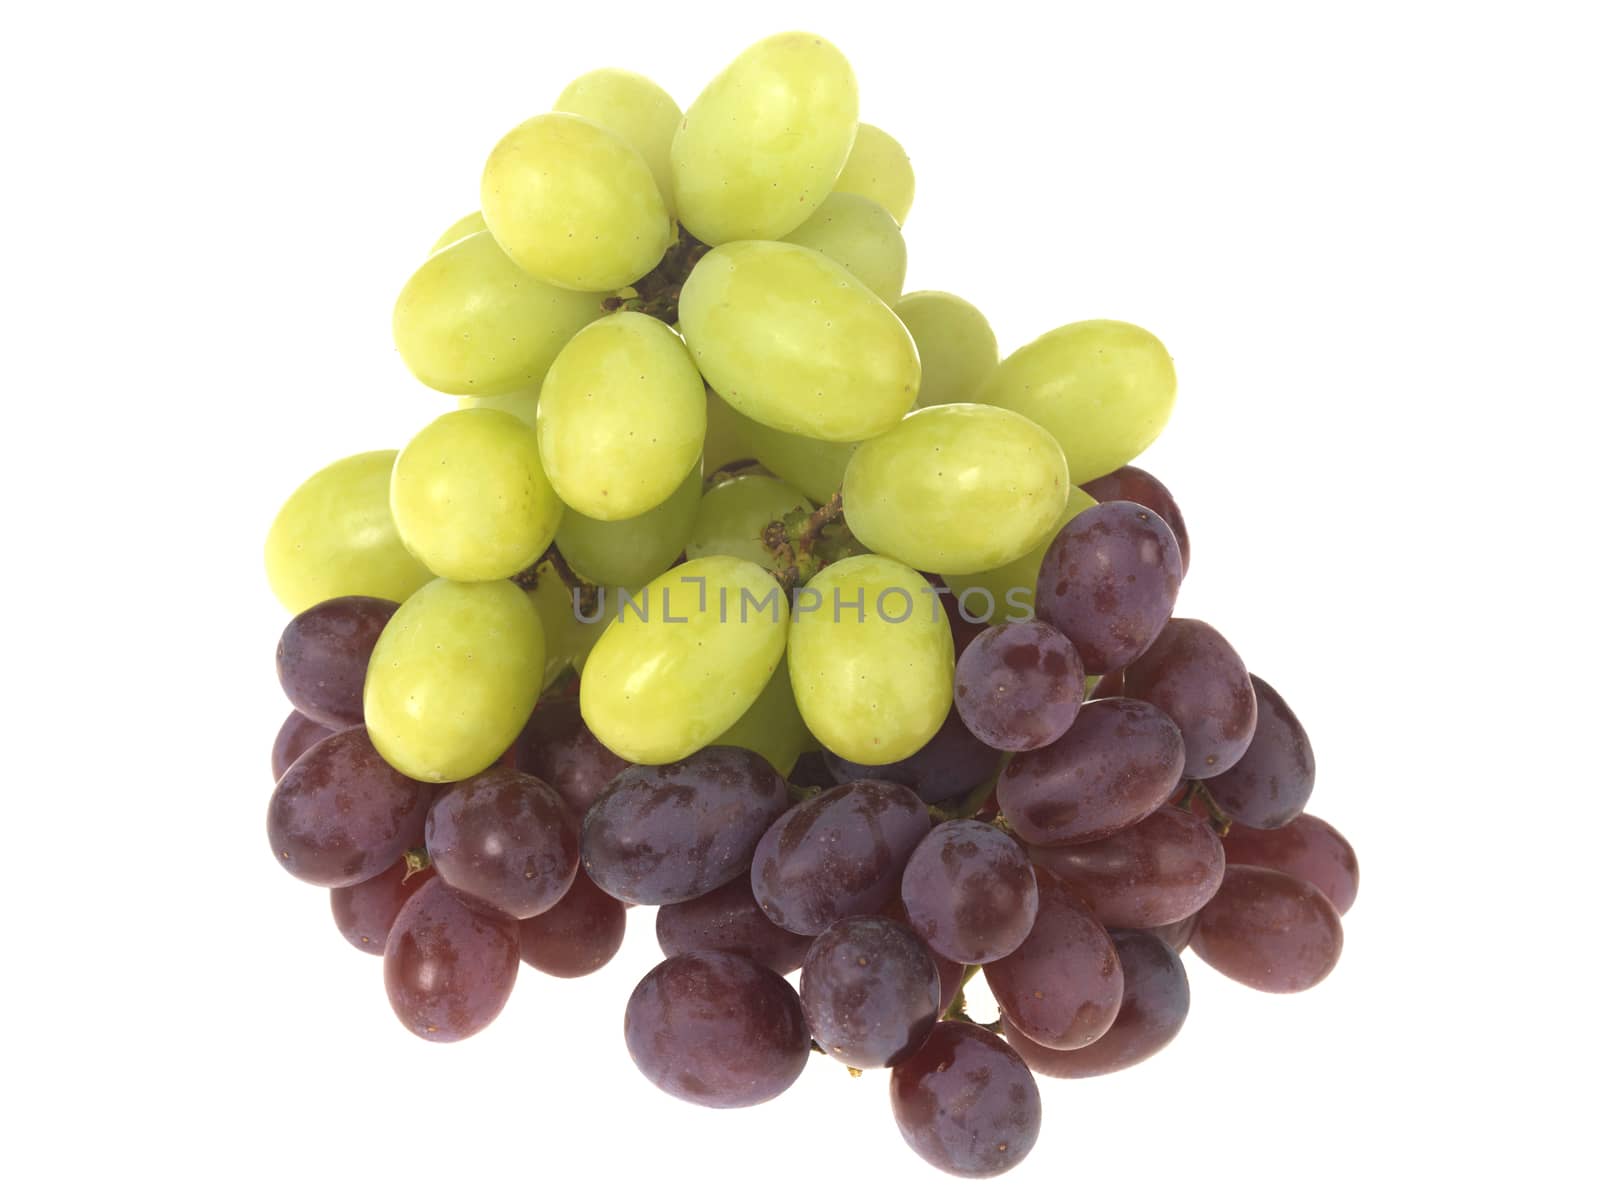 Bunch of Green and Red Grapes by Whiteboxmedia